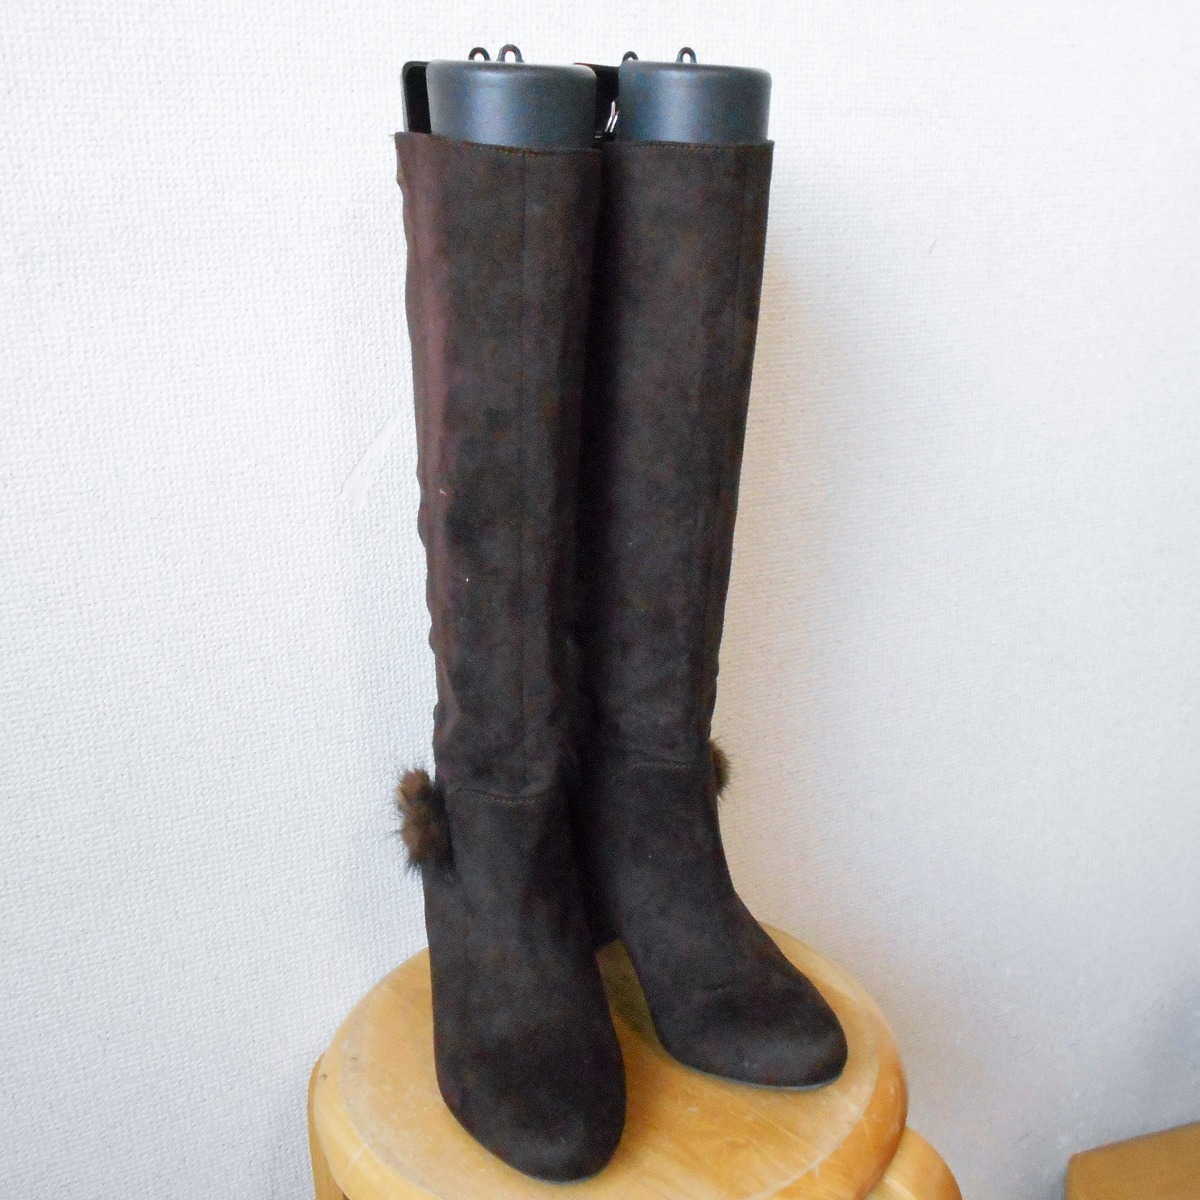  Feroux Feroux Onward . mountain bonbon. pretty lady's for rom and rear (before and after) switch soft . long boots M